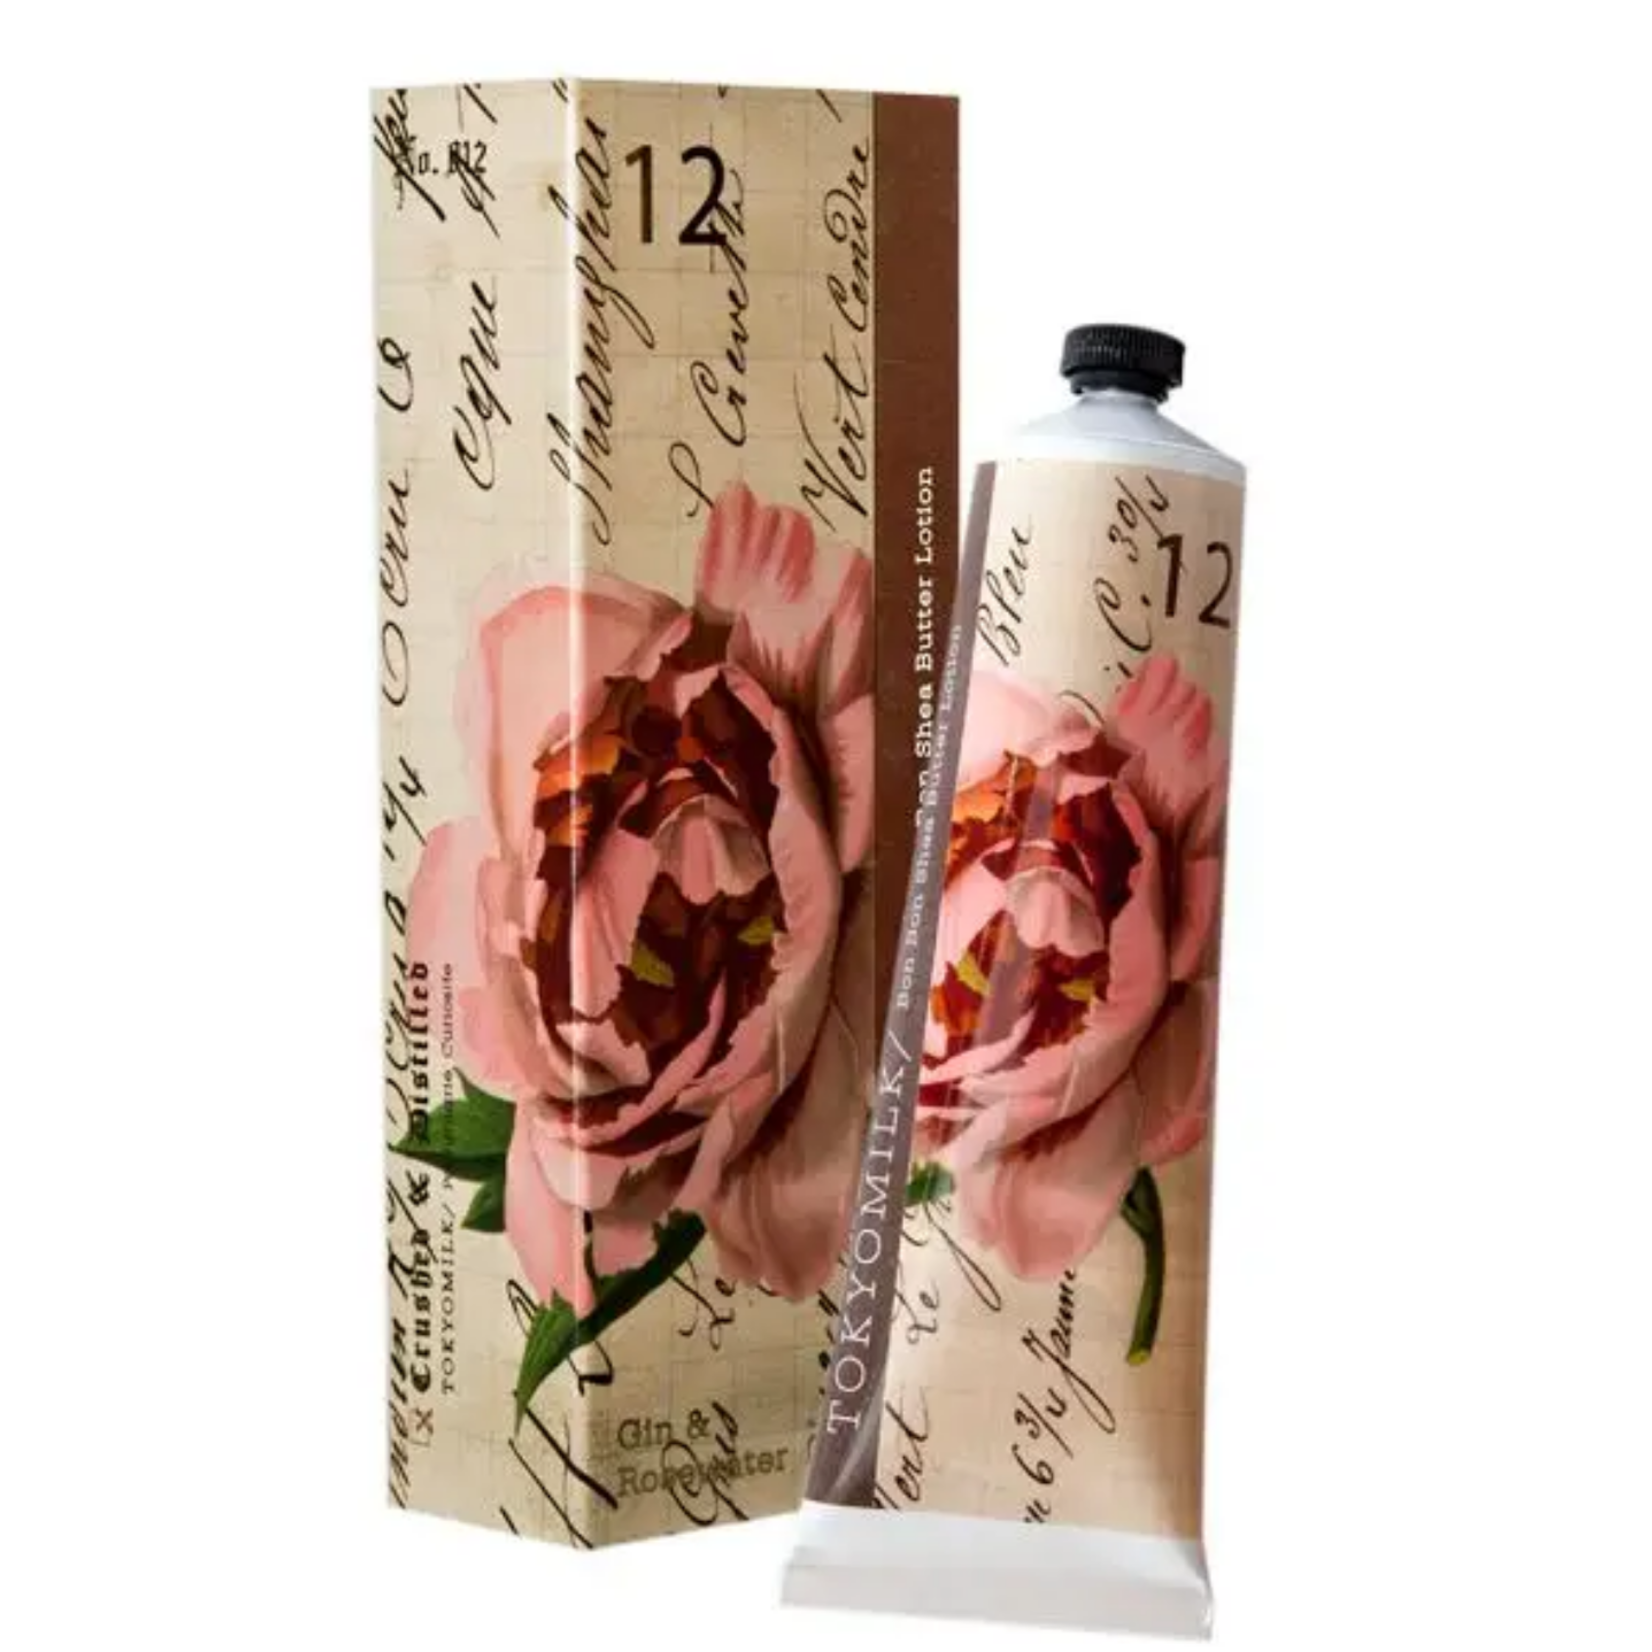 Tokyo Milk Gin and Rosewater No. 12 Shea Butter Lotion